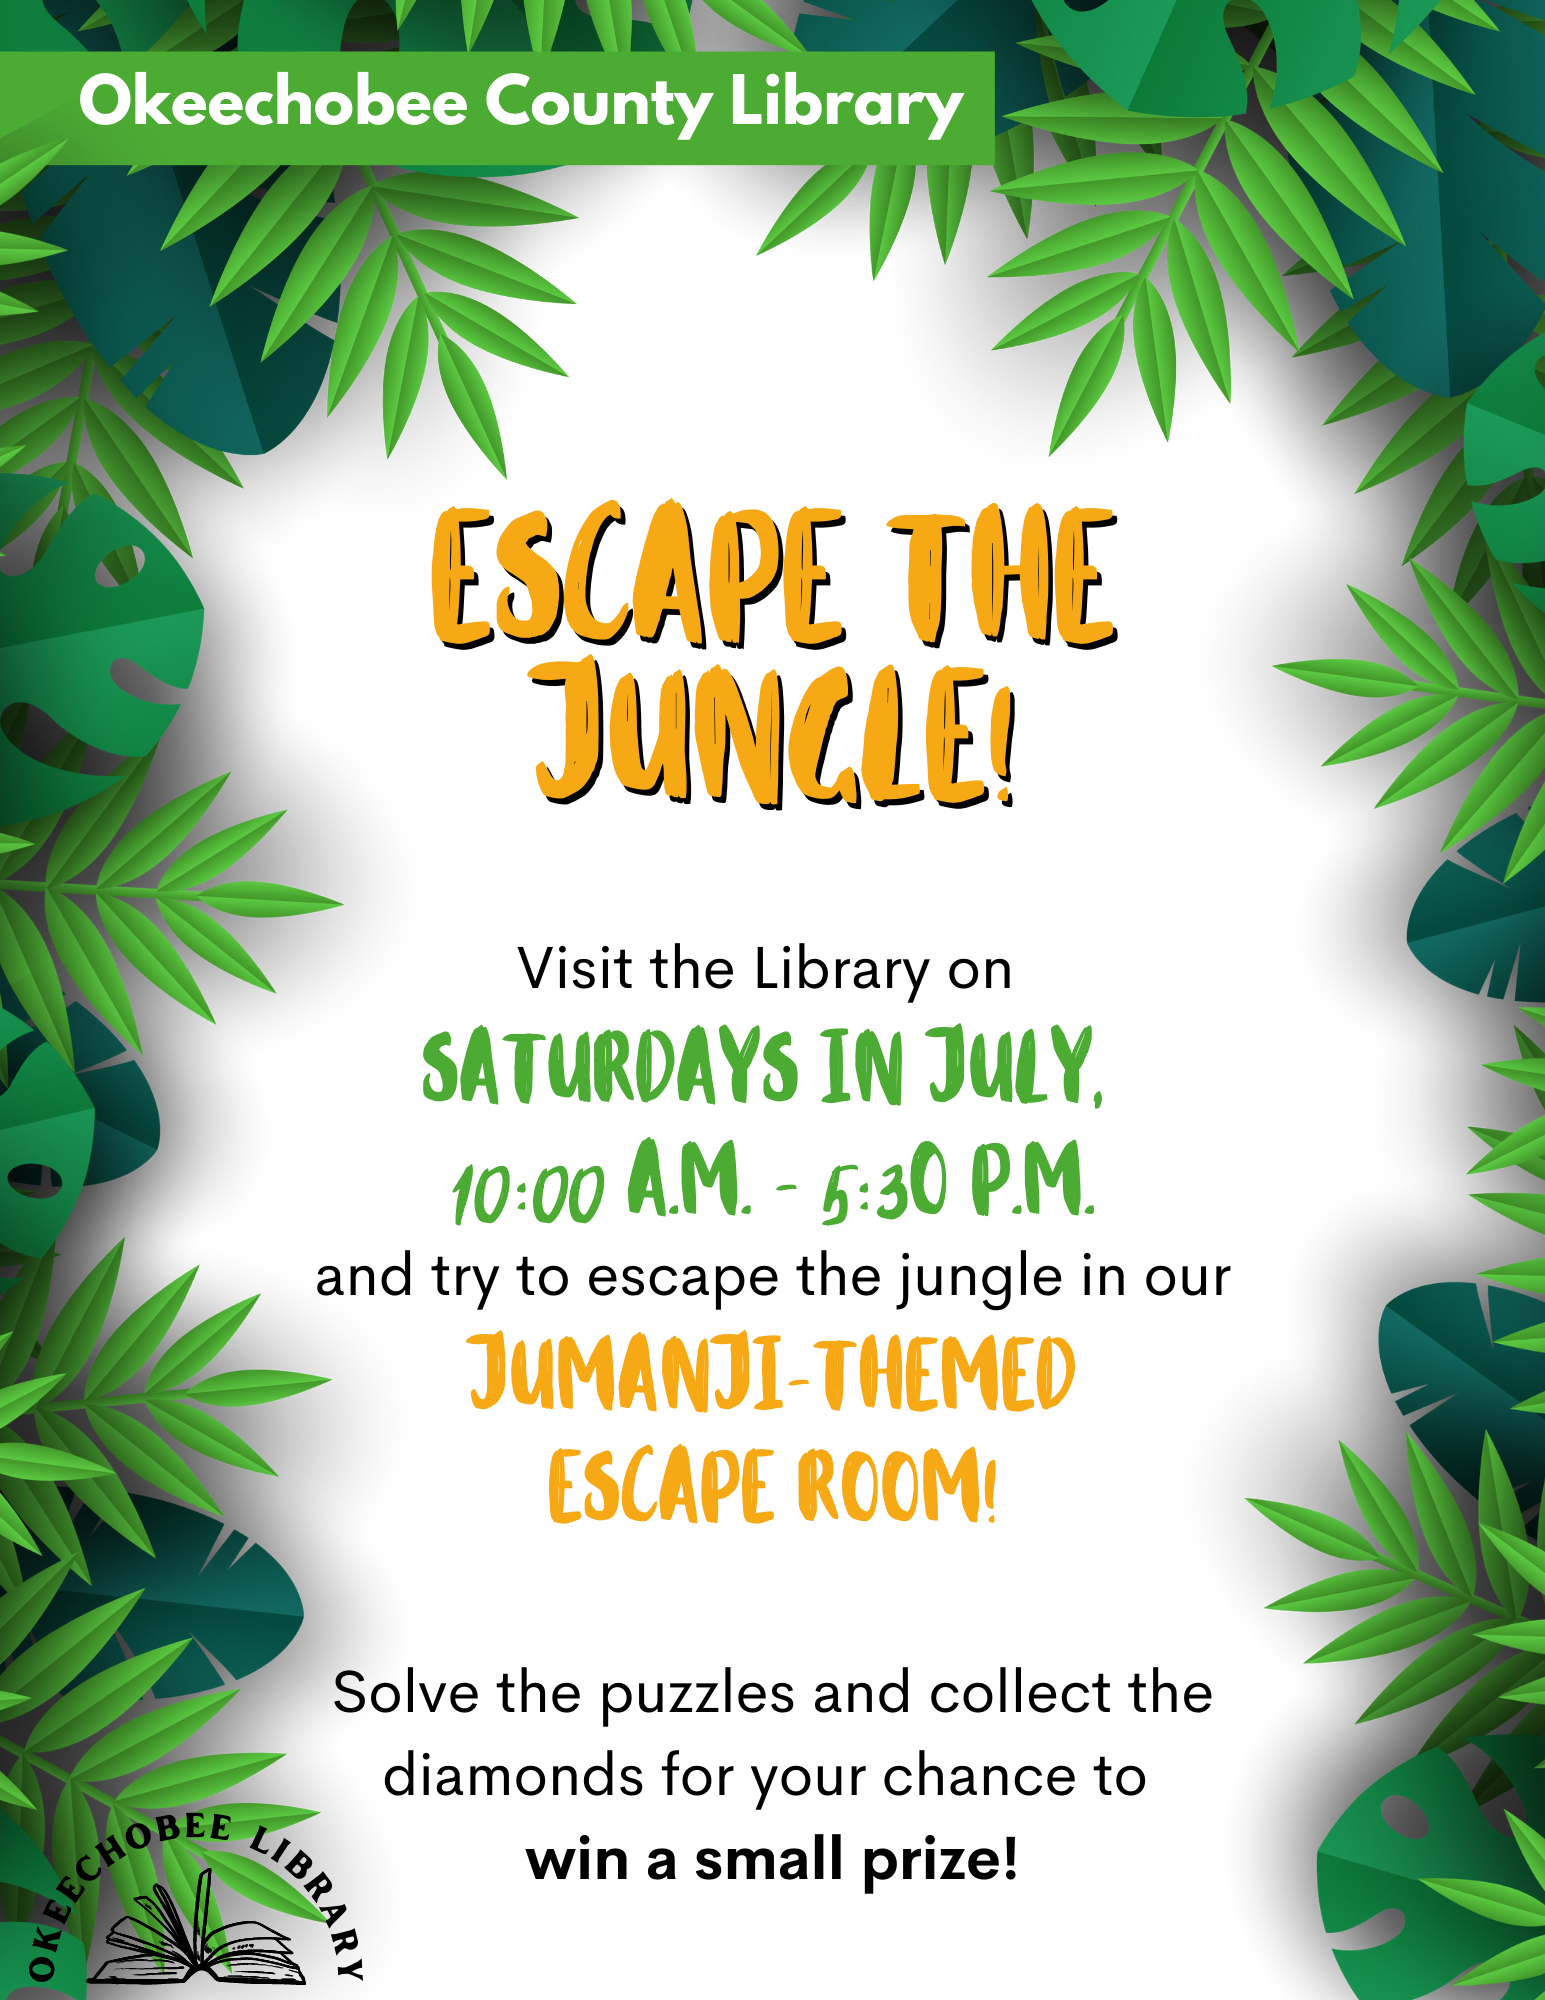 Stop by the Okeechobee Library on Saturdays in July to try and escape our Jumanji-themed escape room!